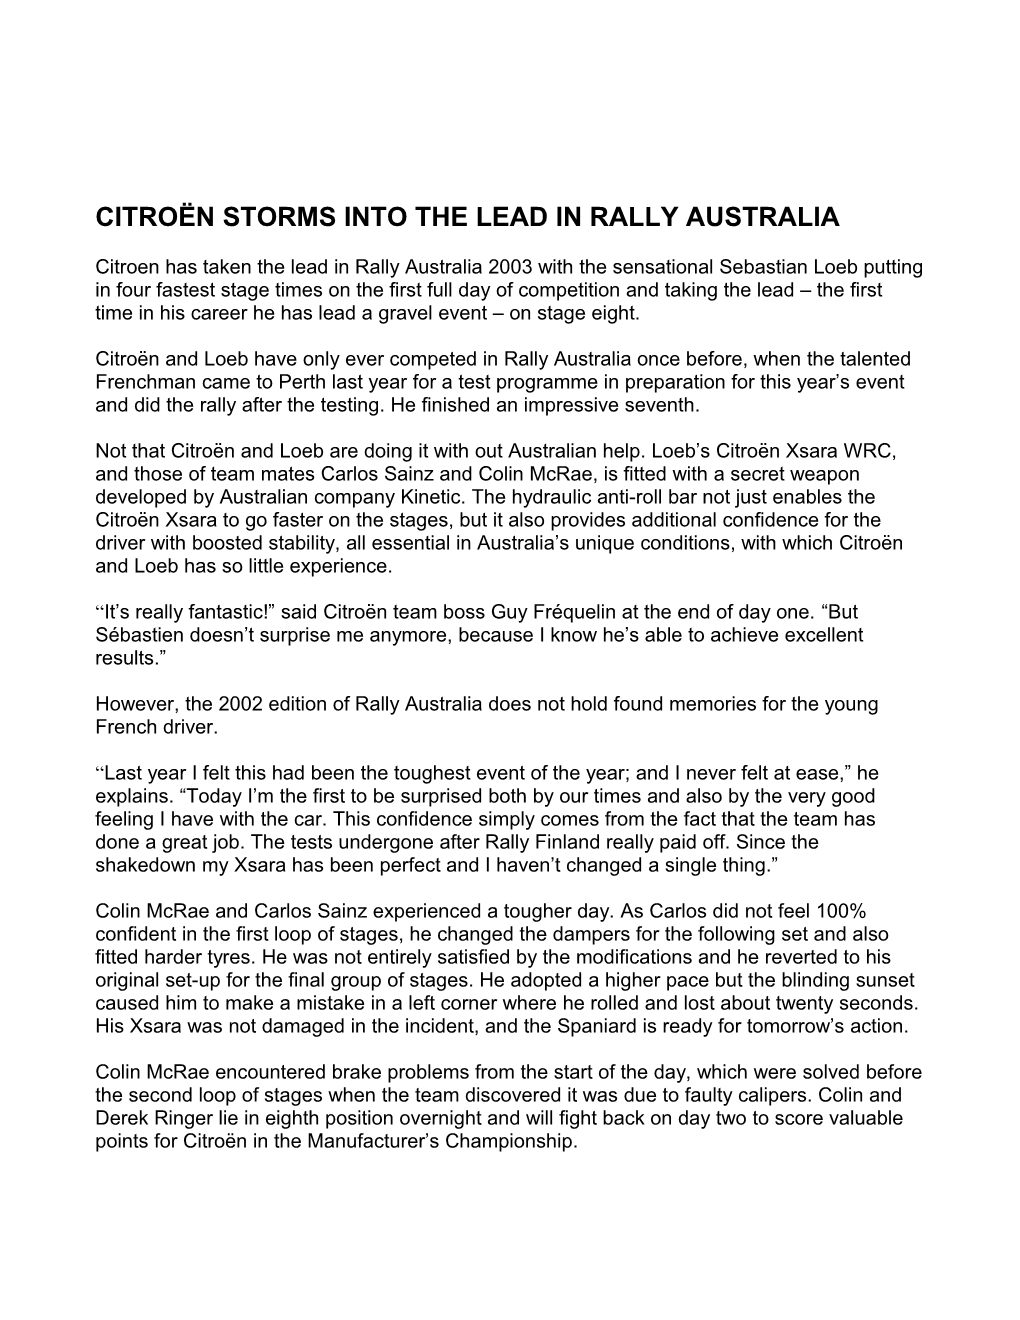 Citroën Storms Into the Lead in Rally Australia